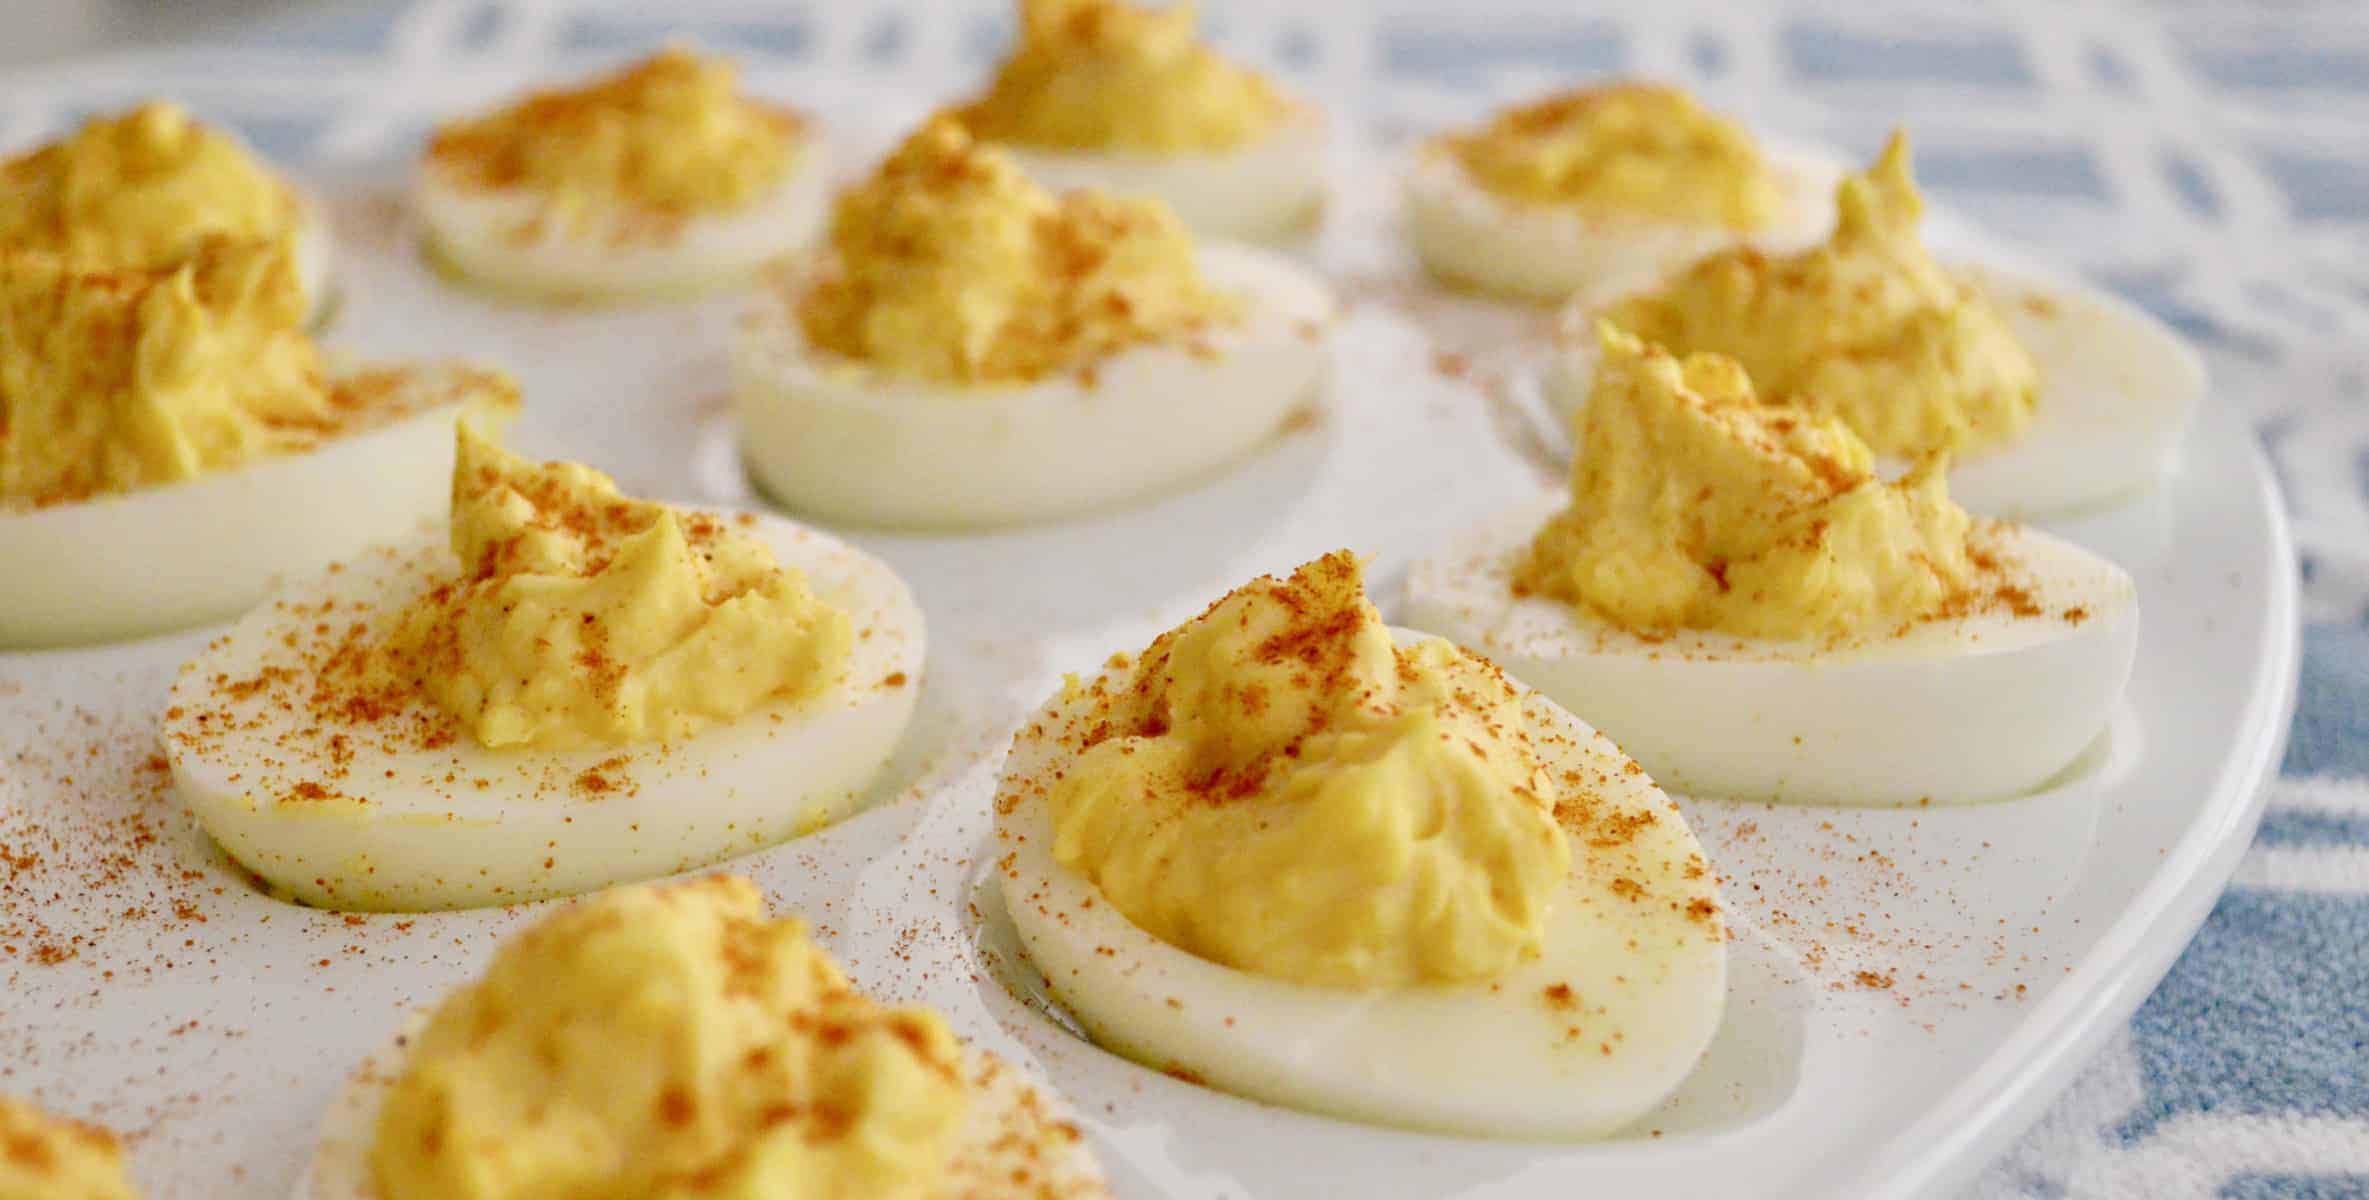 Easy Deviled Eggs are the best classic recipe that is easy and healthy. Best Brunch Recipes. This budget-friendly appetizer is delicious and so easy. #deviledeggs #eggs #appetizer #brunch #breakfast #babyshower #bridalshower #budget #holidays #easter #christmas #best #classic #easyrecipe